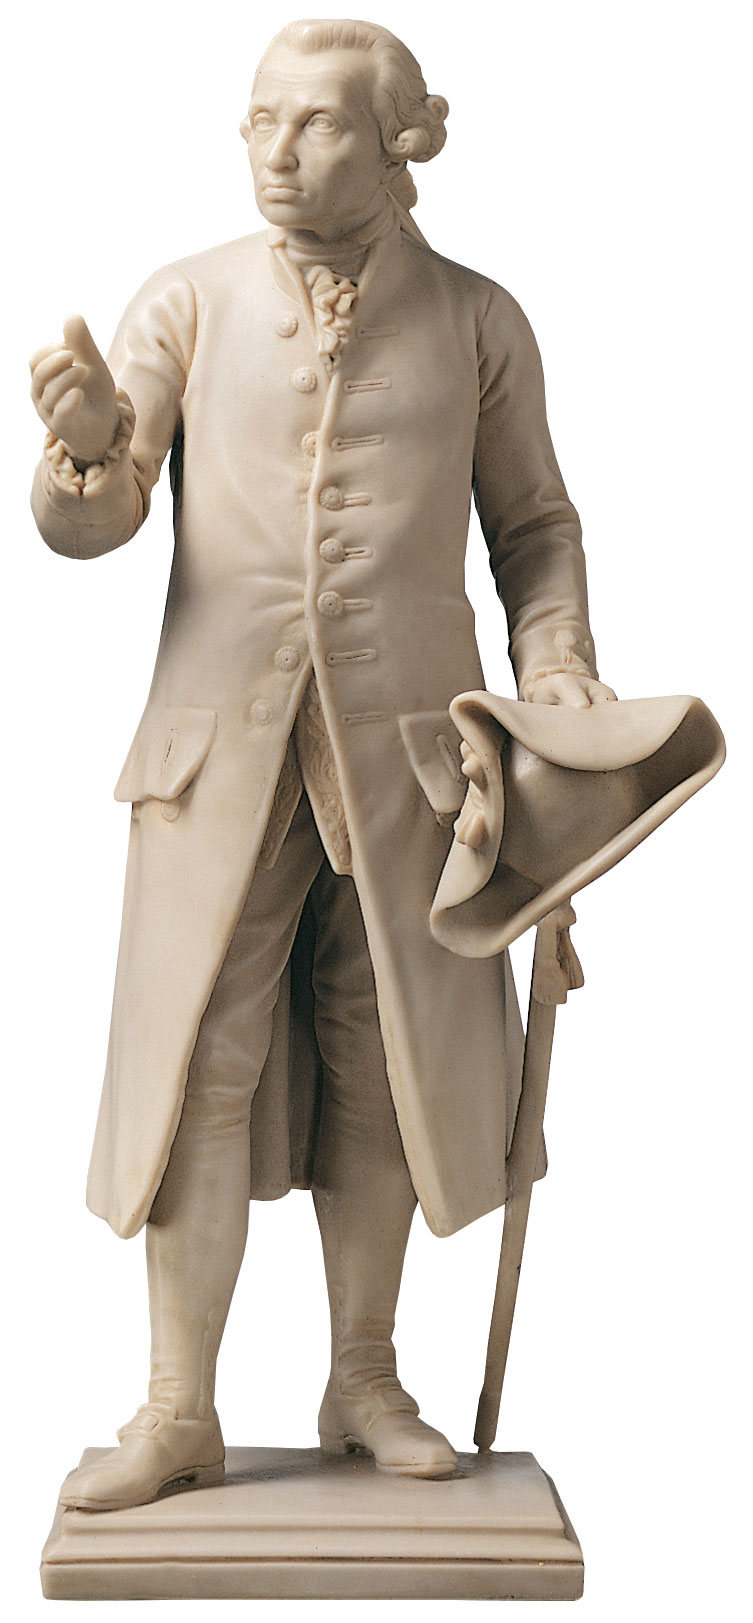 Sculpture "Immanuel Kant", version in artificial marble by Christian Daniel Rauch